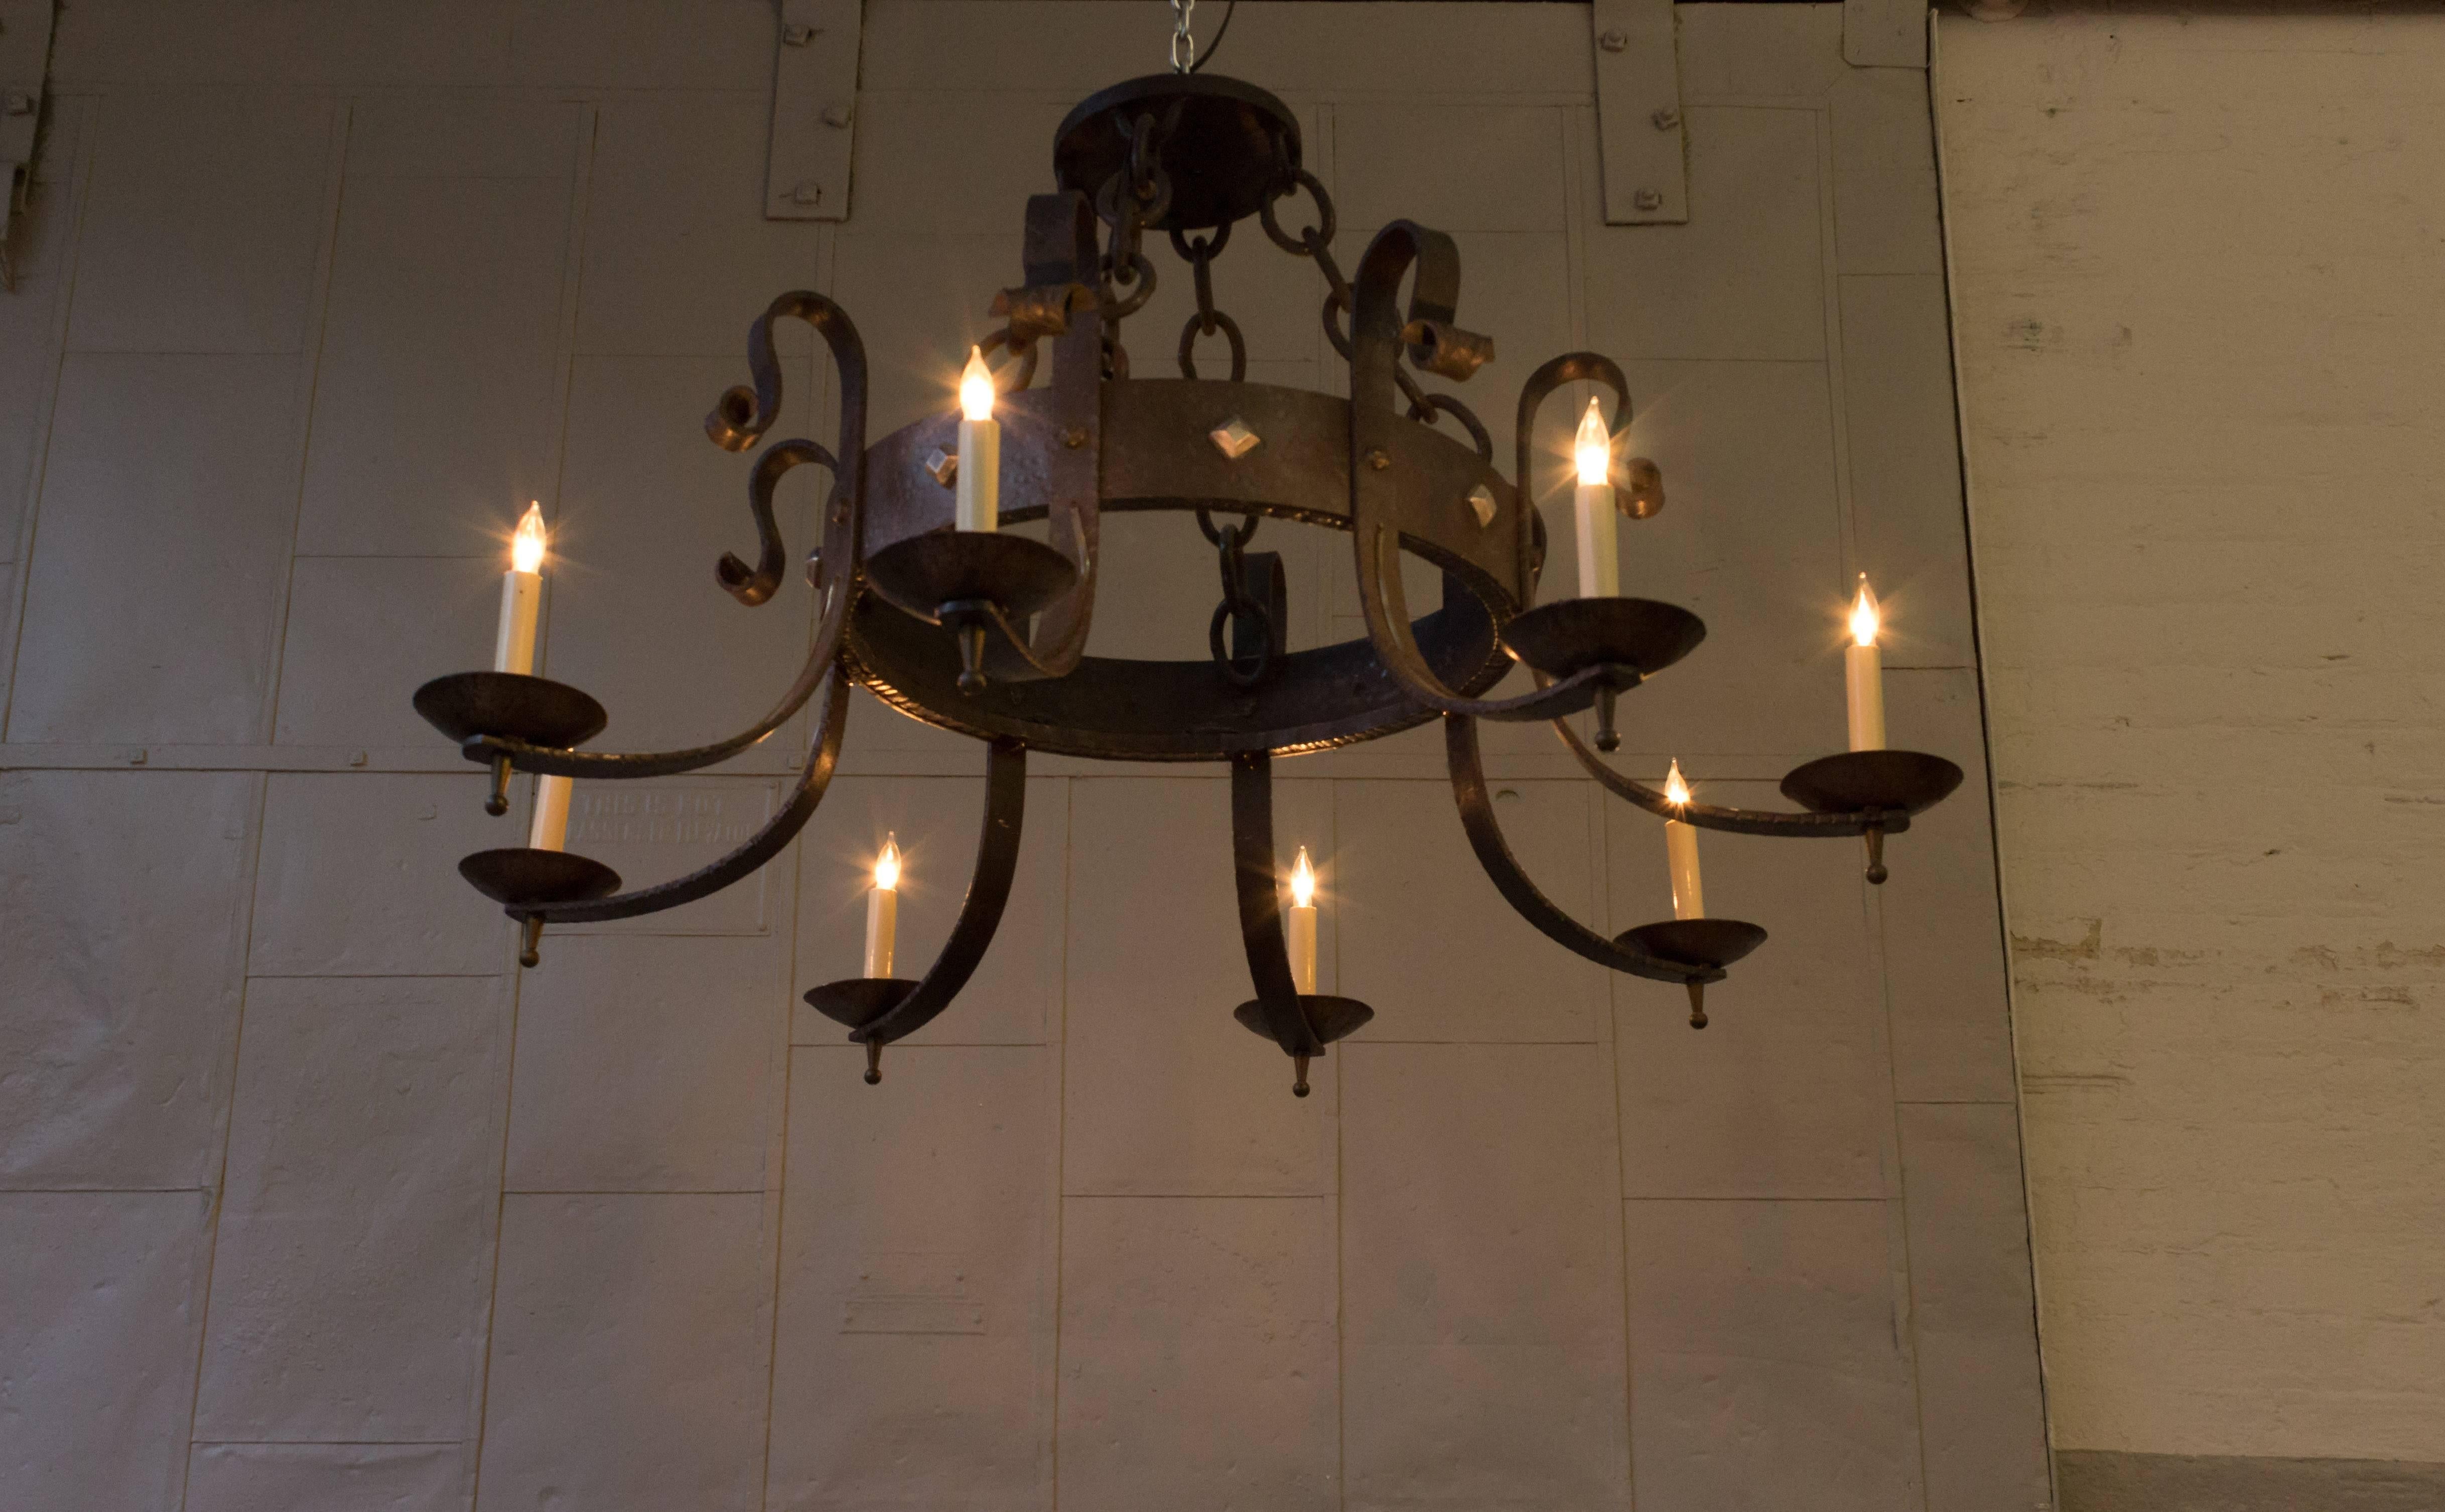 This exceptional gothic style Spanish eight-arm wrought iron chandelier boasts a distinctive hammered finish, a sturdy heavy linked chain, and an exquisite brass finial detail adorning the bottom of the lights. This remarkable piece is in very good